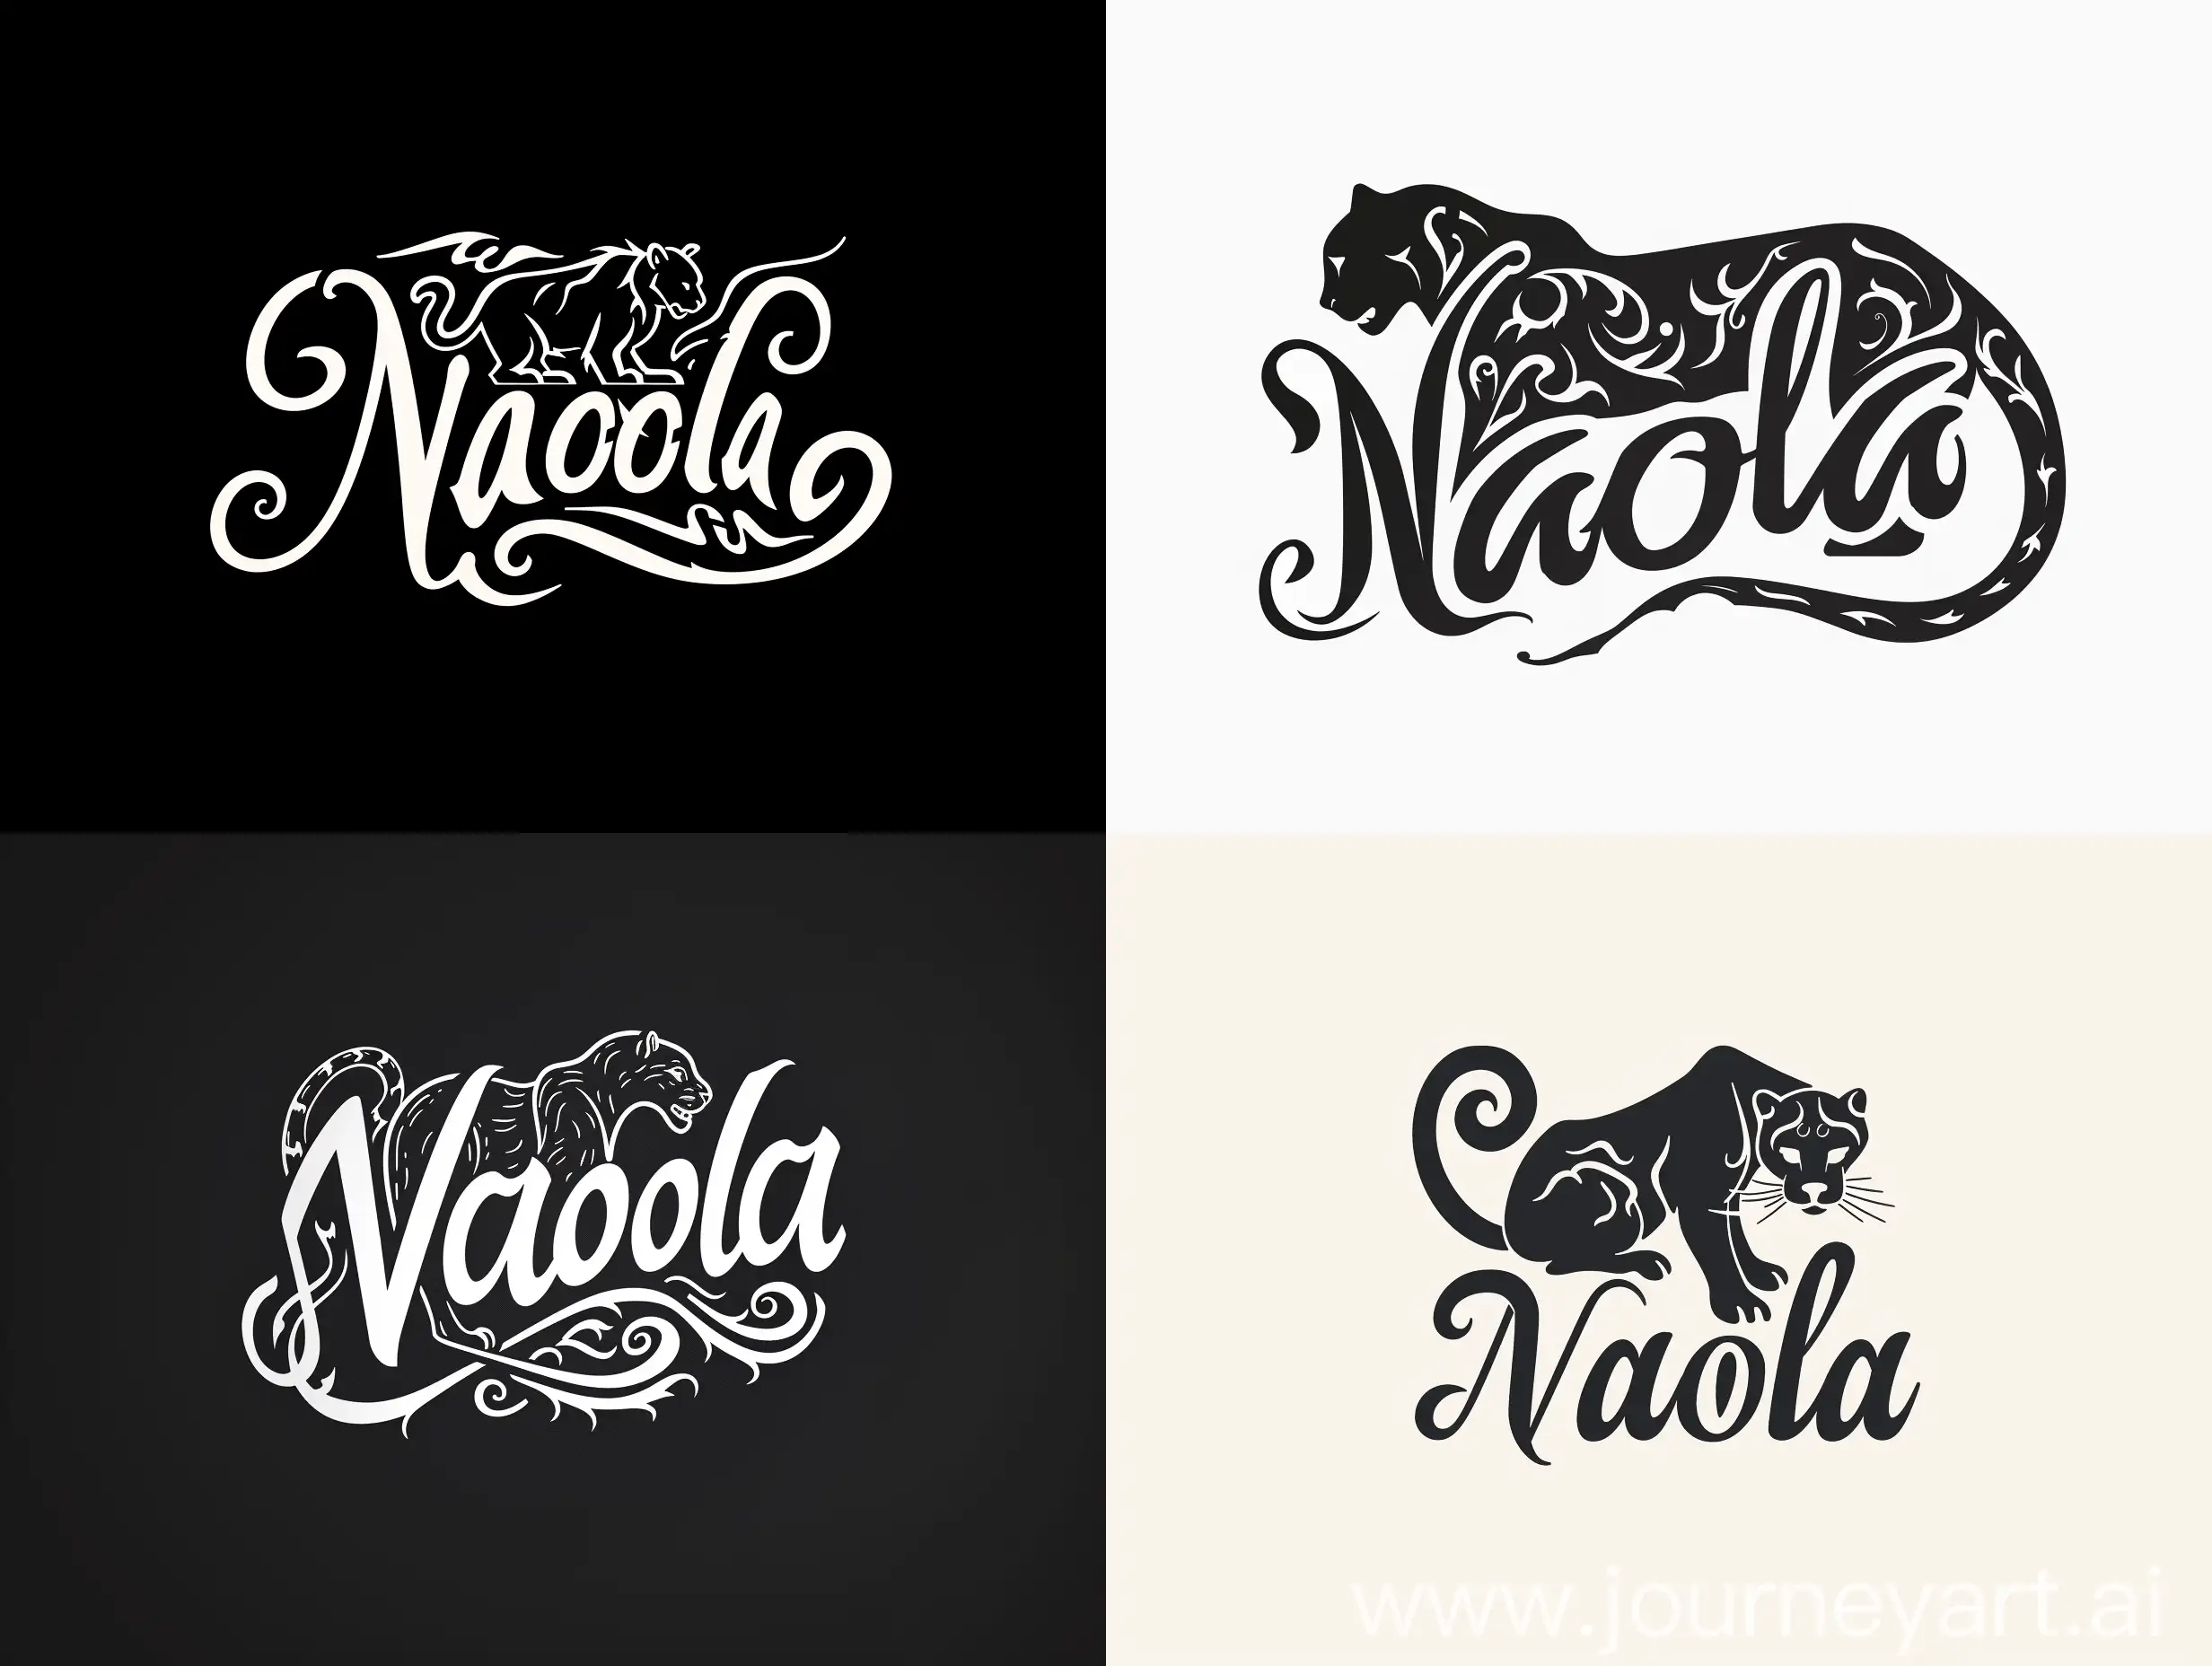 Minimalistic-Panther-Logo-Design-Calligraphic-Lettering-with-Naola